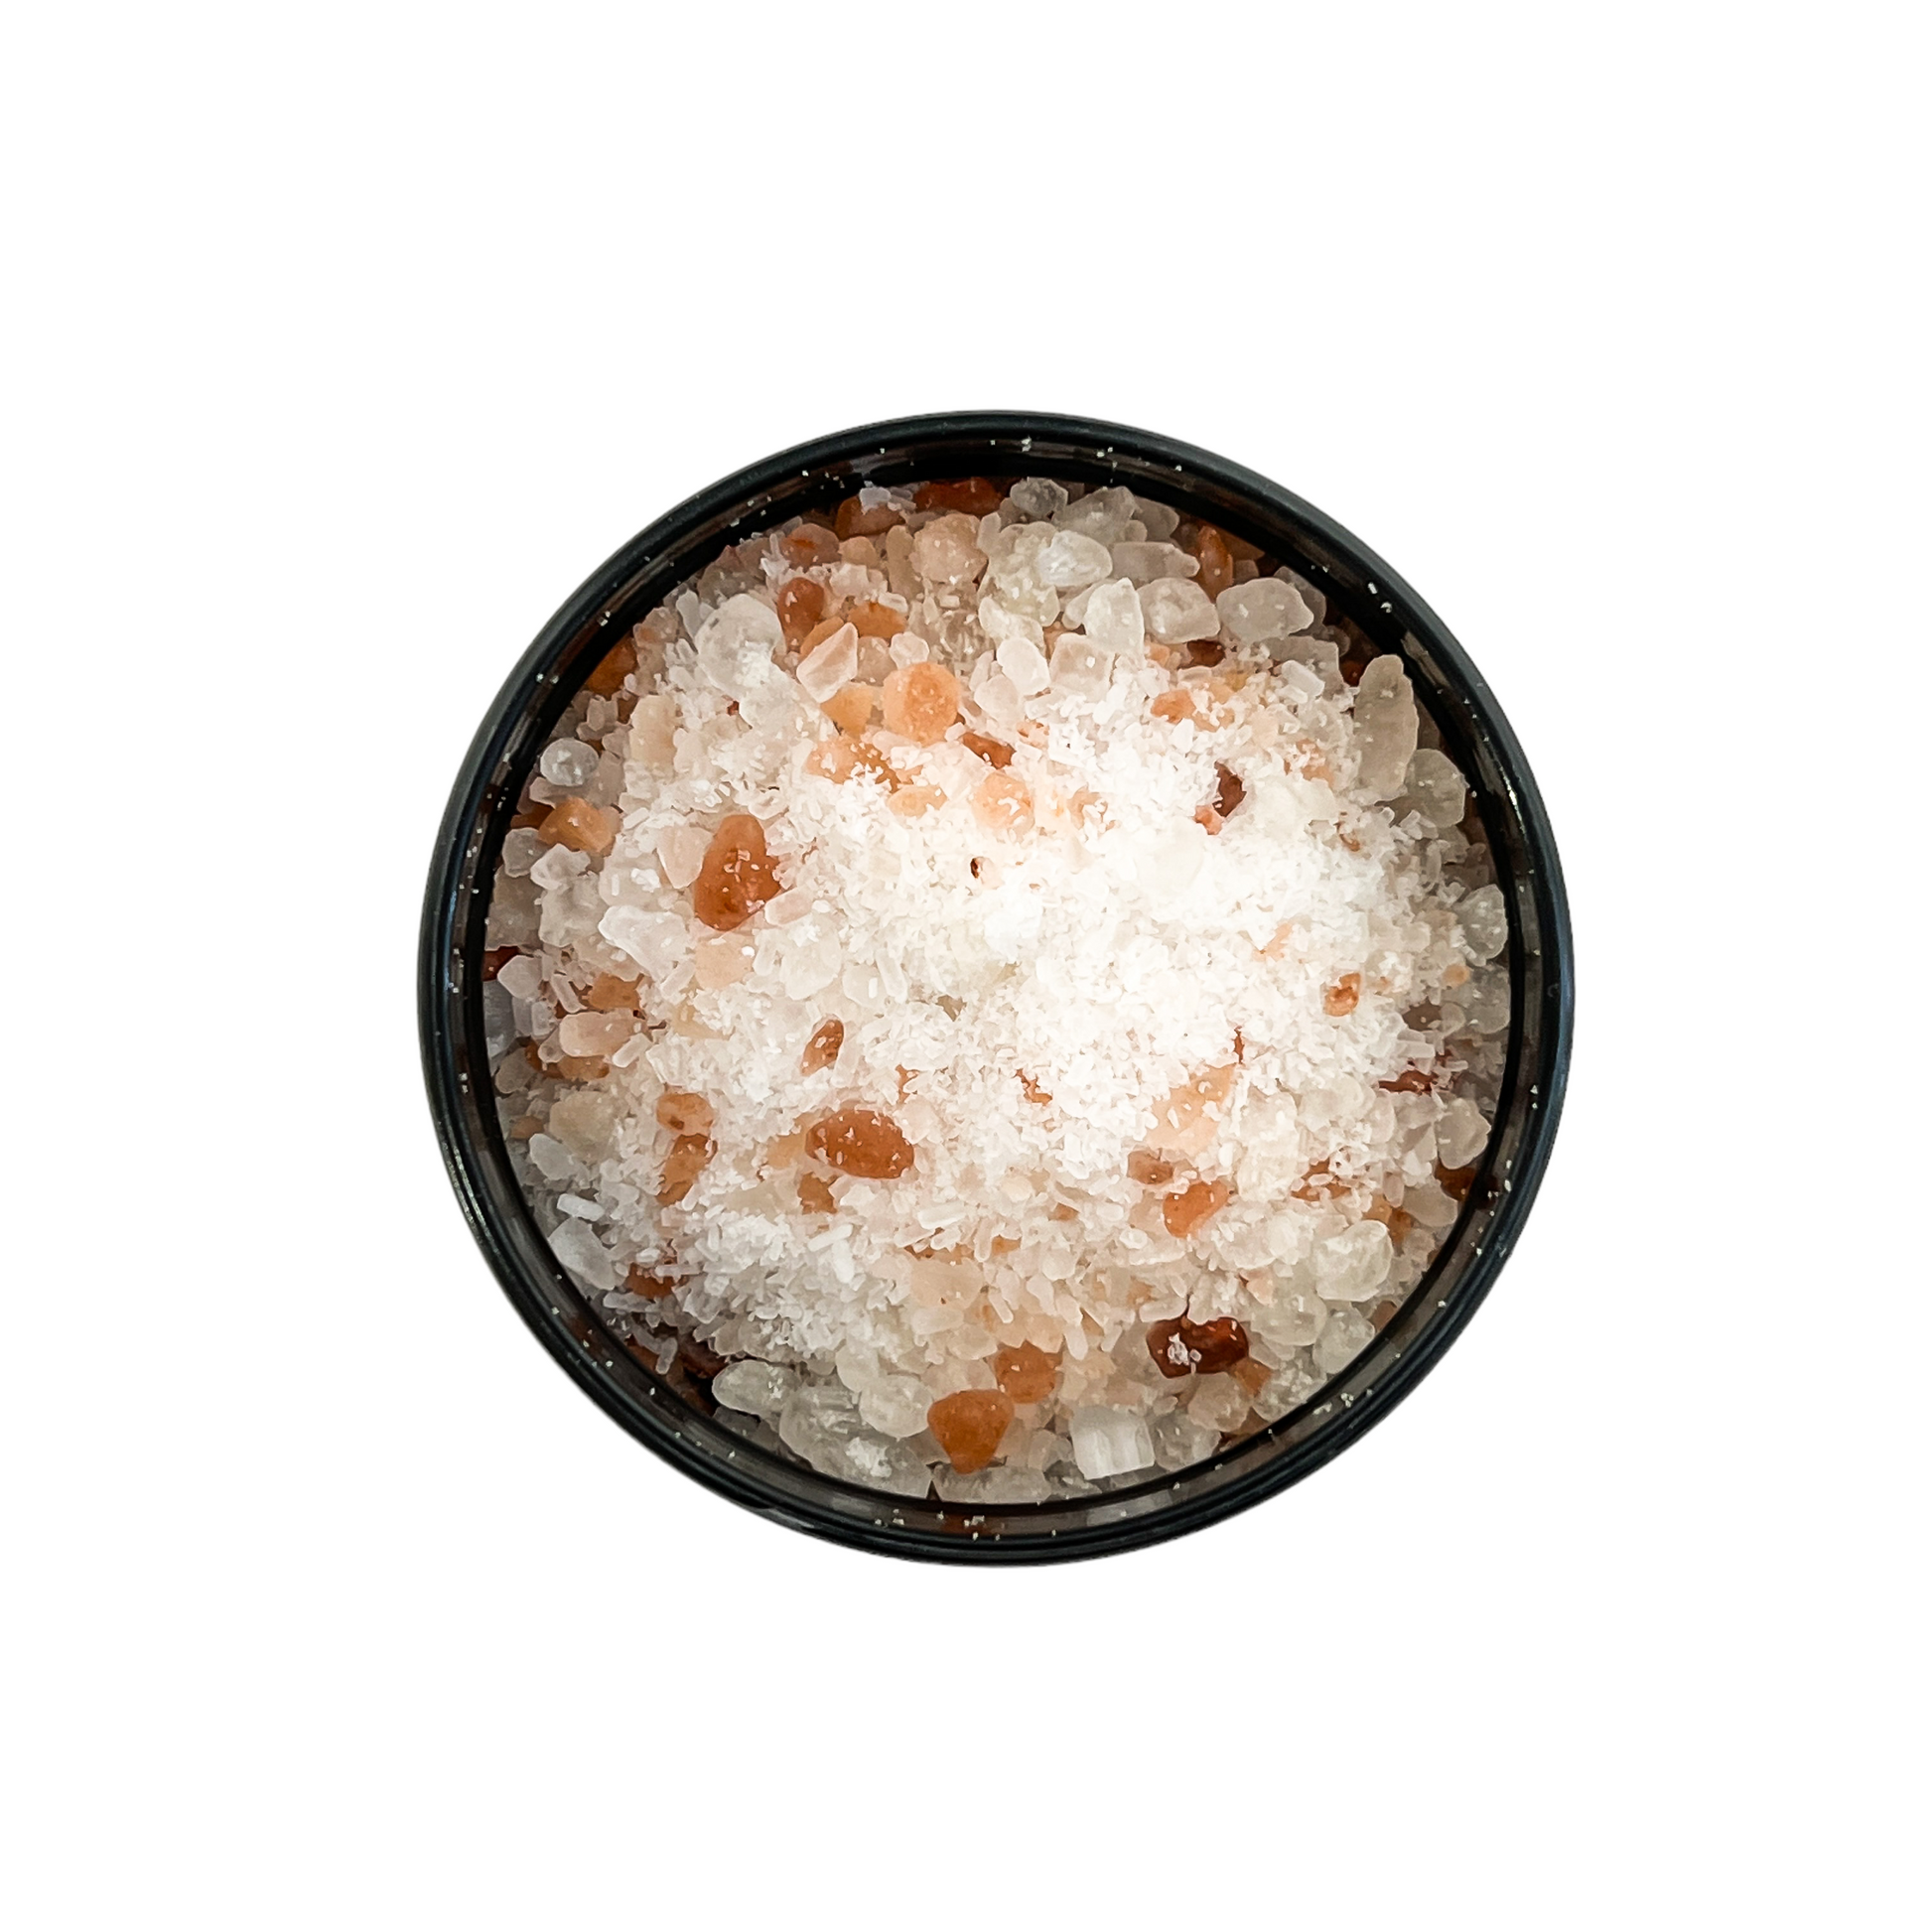 Black container with a white label that reads "elixir" and is filled with pink Himalayan salt, dead sea salt, epsom salt, and peppermint essential oils.